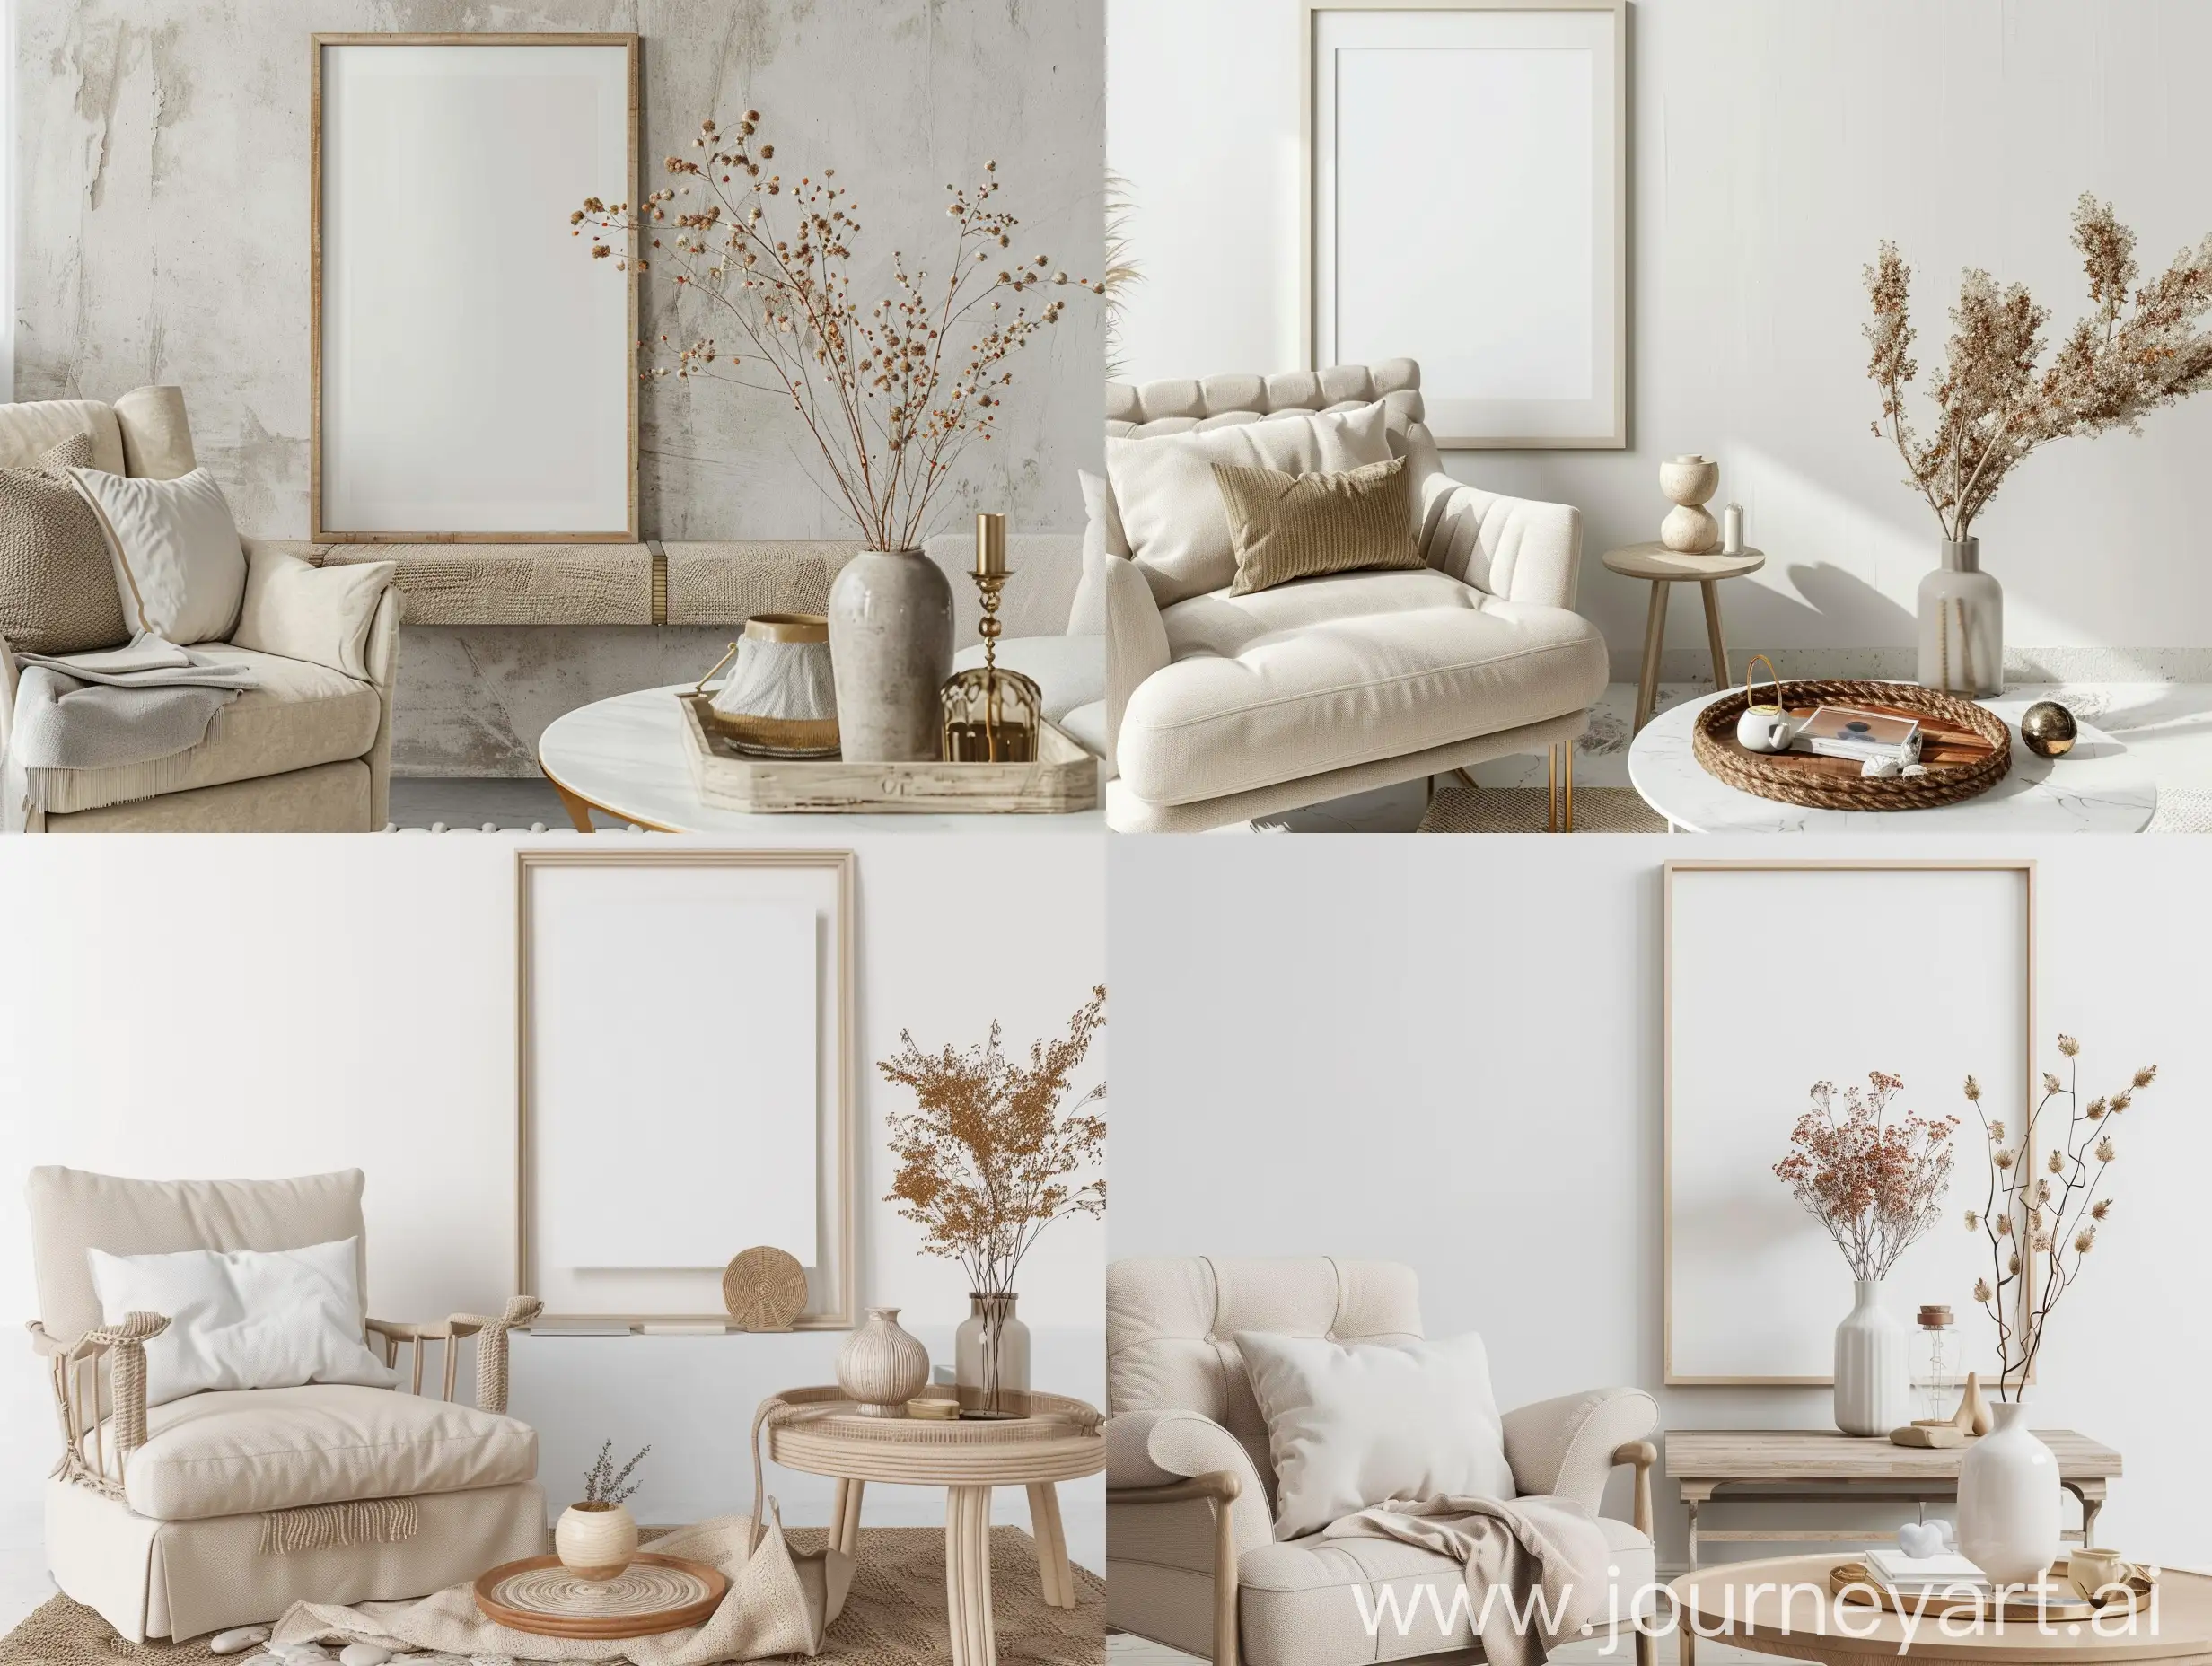 Elegan composition of living room interior with mock up poster frame, beige armchair, stylish tray, vase with dried flowers, decoration, coffee table and personal accessories. Home decor